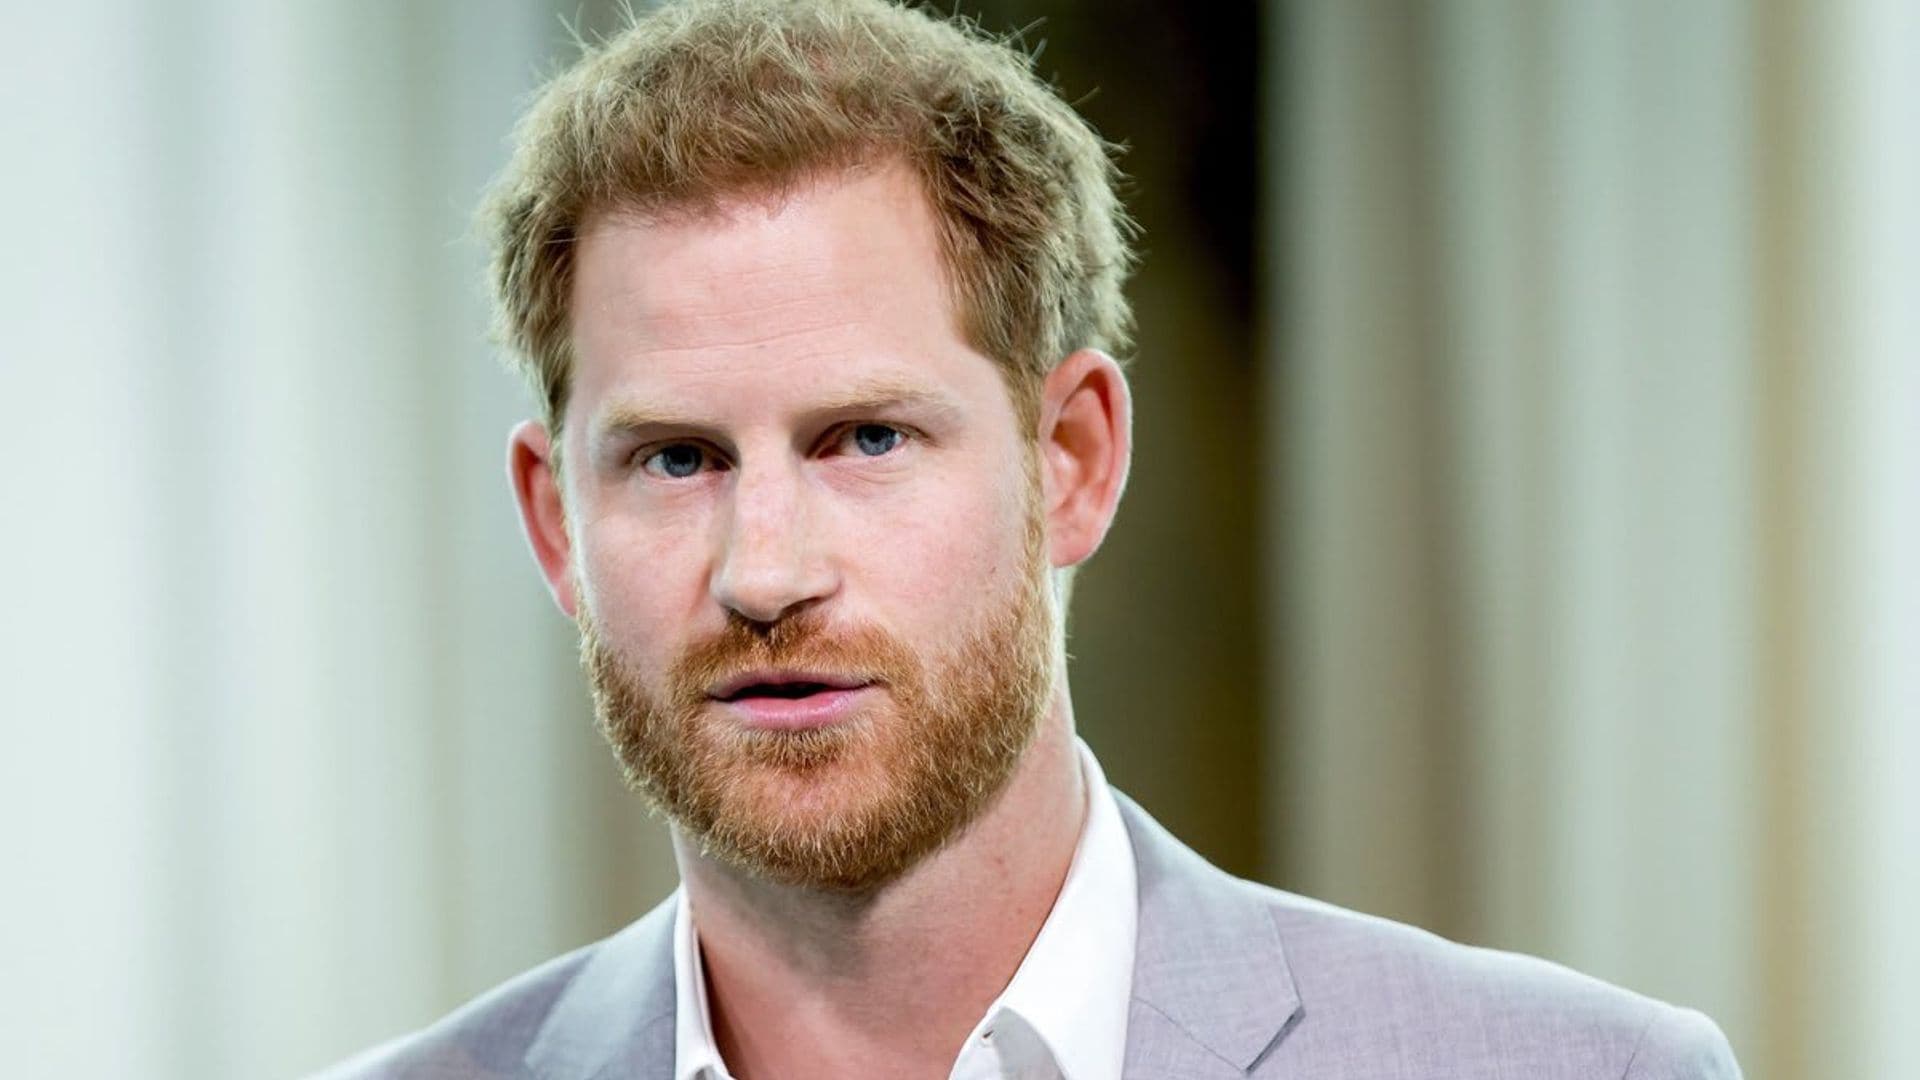 Has Prince Harry spoken with his family about his upcoming memoir?